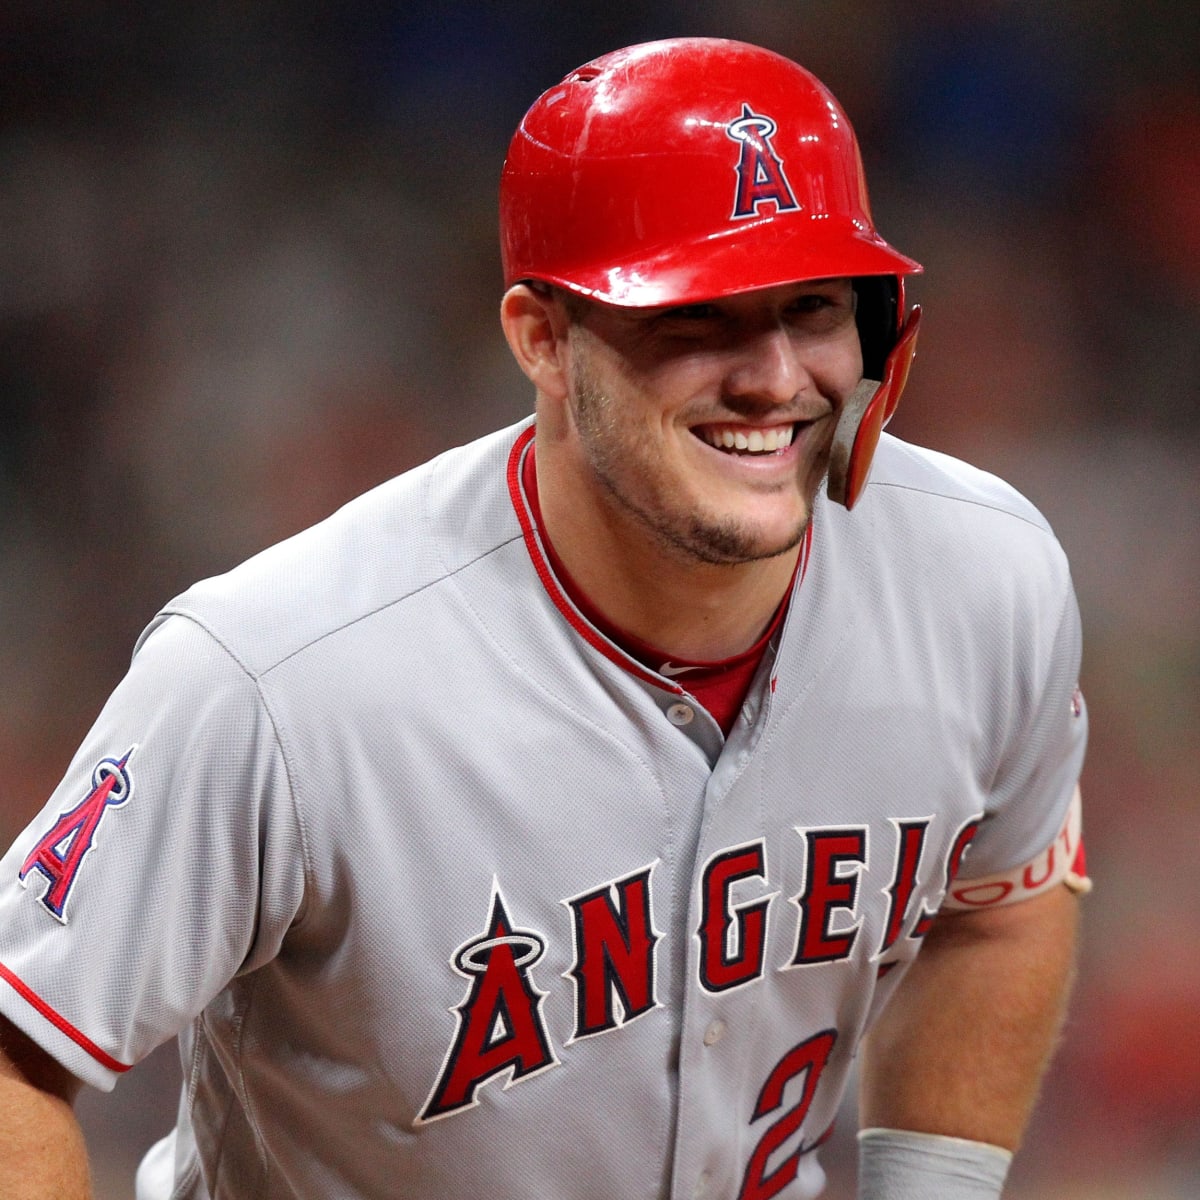 Mike Trout rookie card fetches over $900K at auction - Sports Illustrated